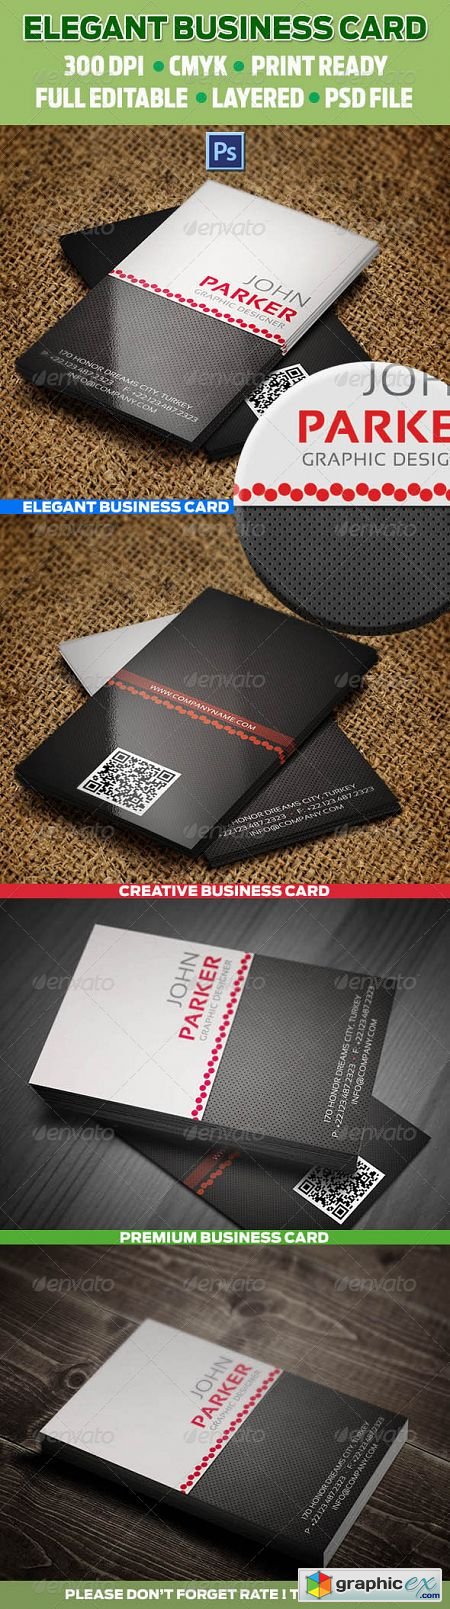 Creative Business Cards 22